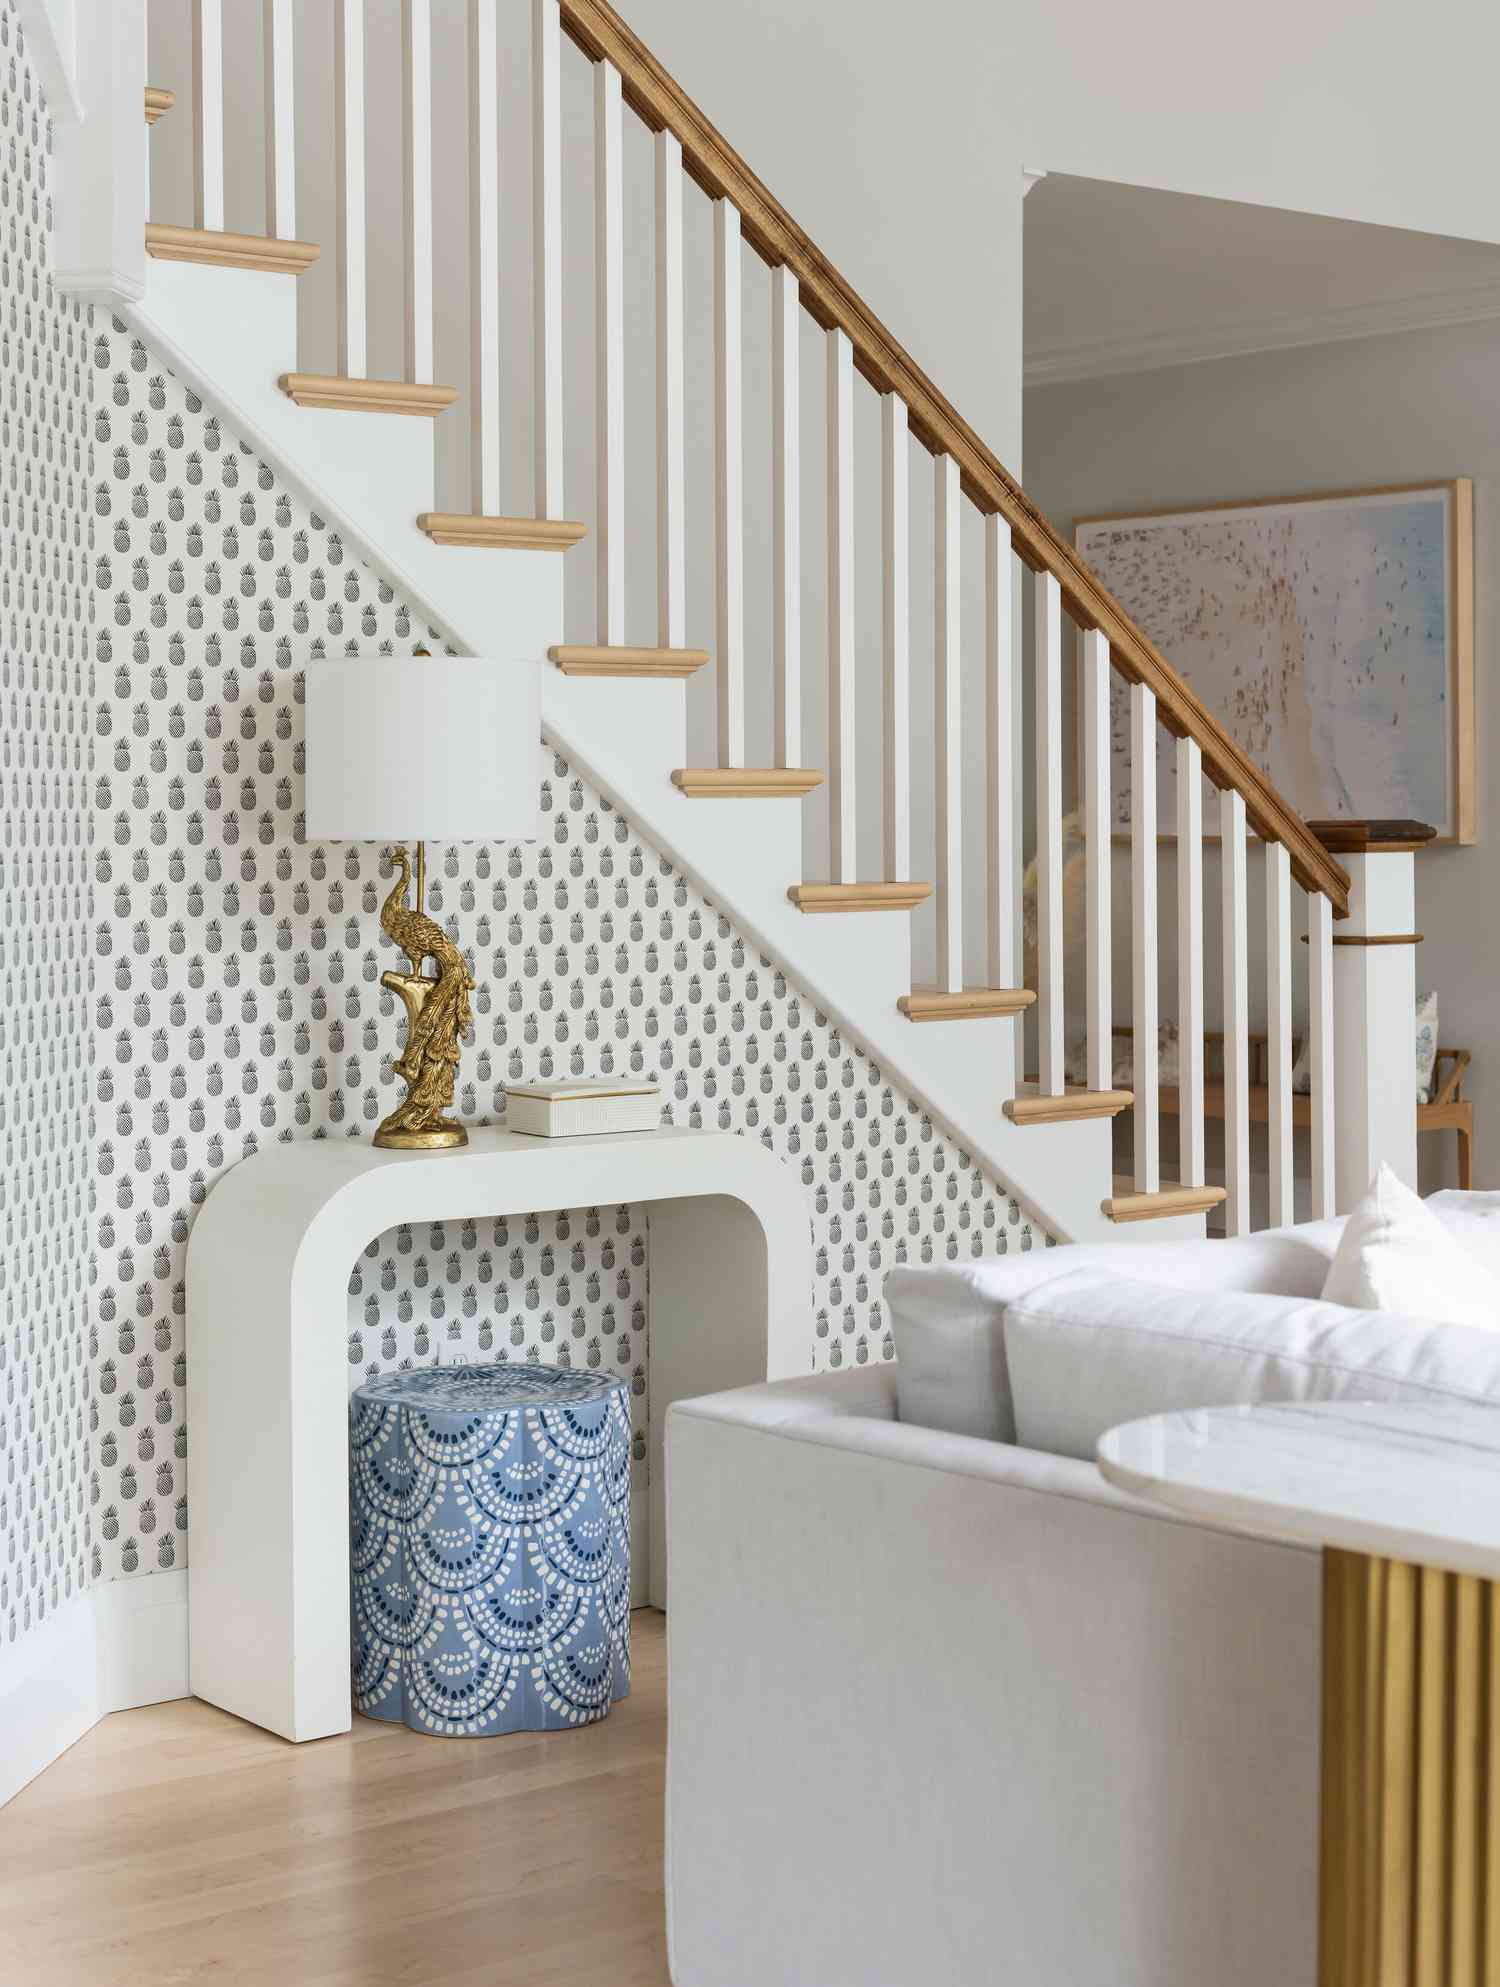 wallpaper wood stairs ideas